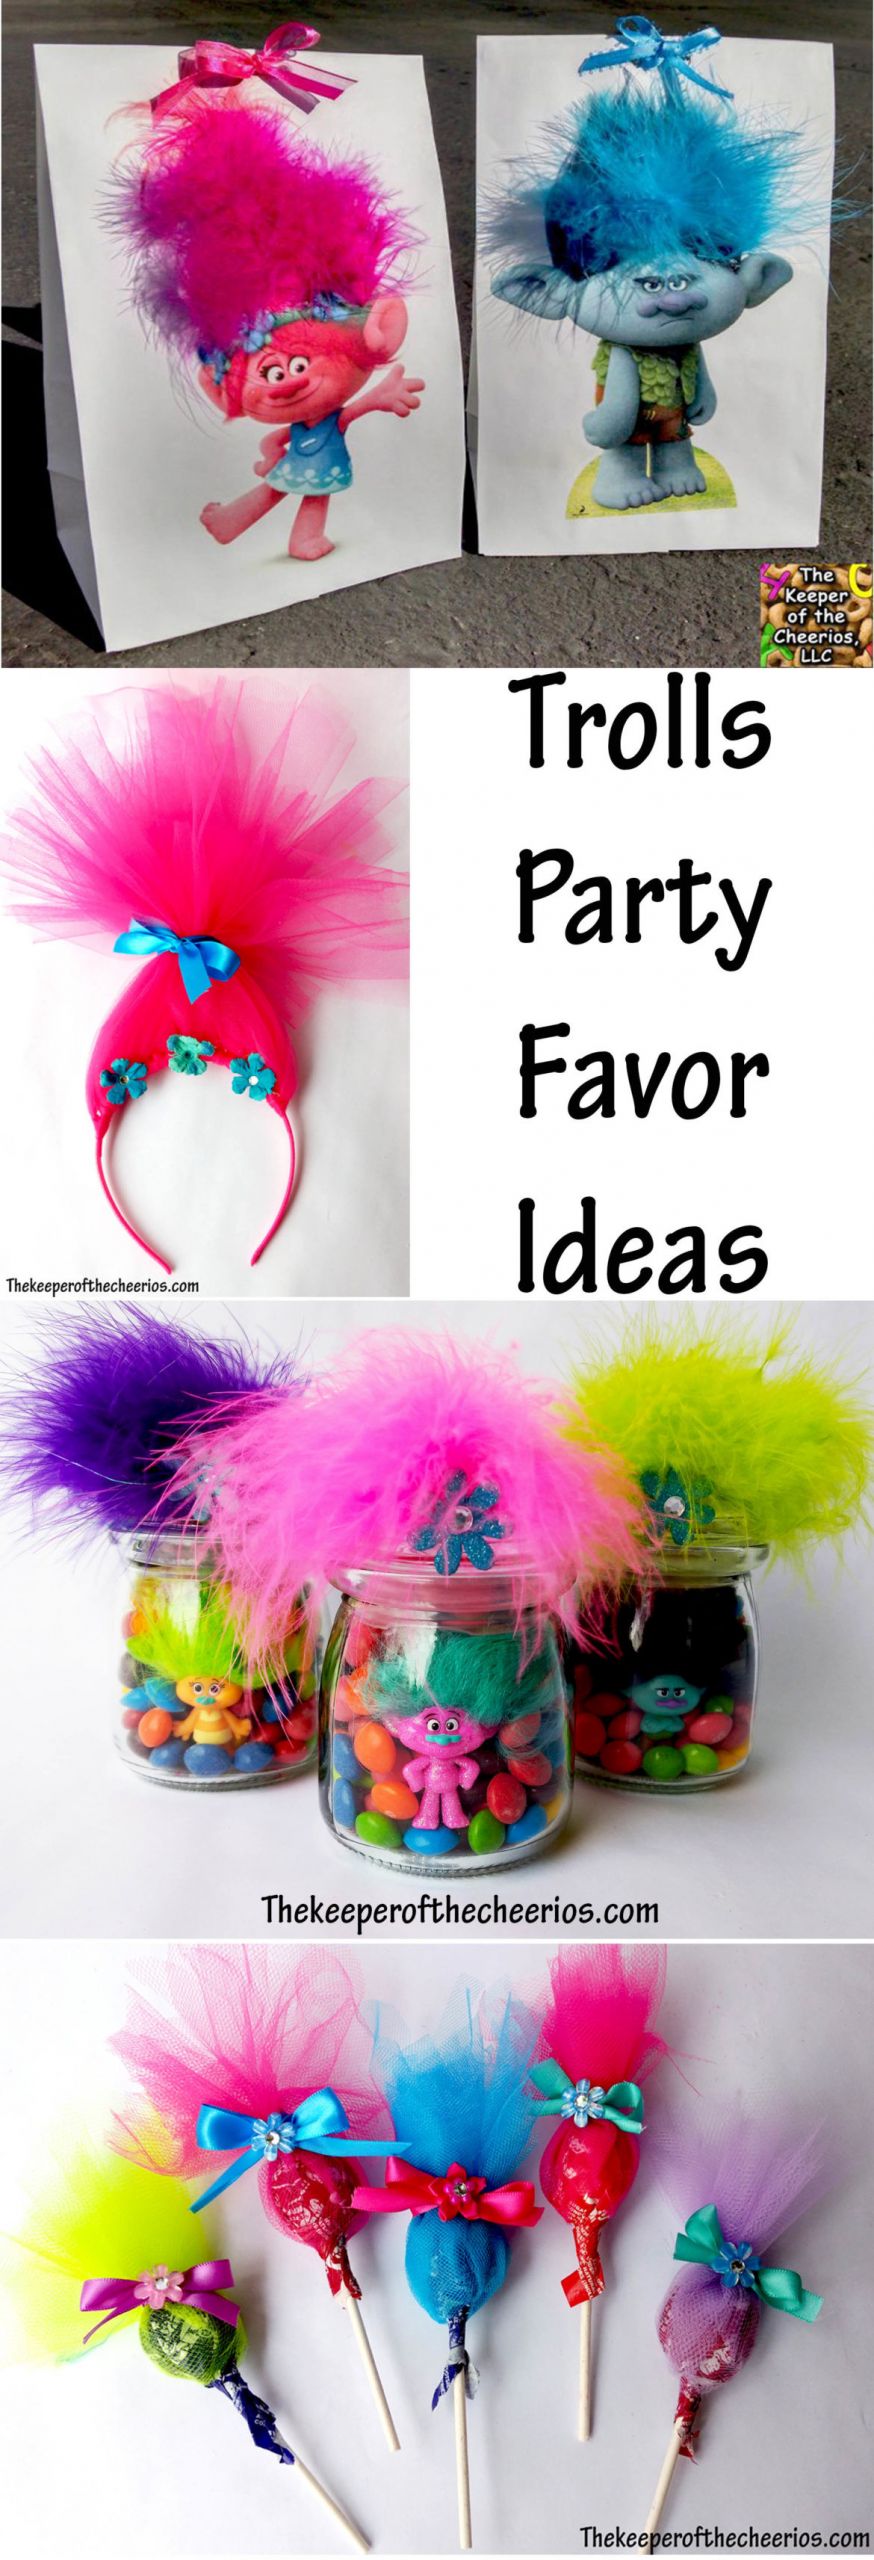 Trolls Movie Party Ideas
 Trolls Party Favor Ideas The Keeper of the Cheerios